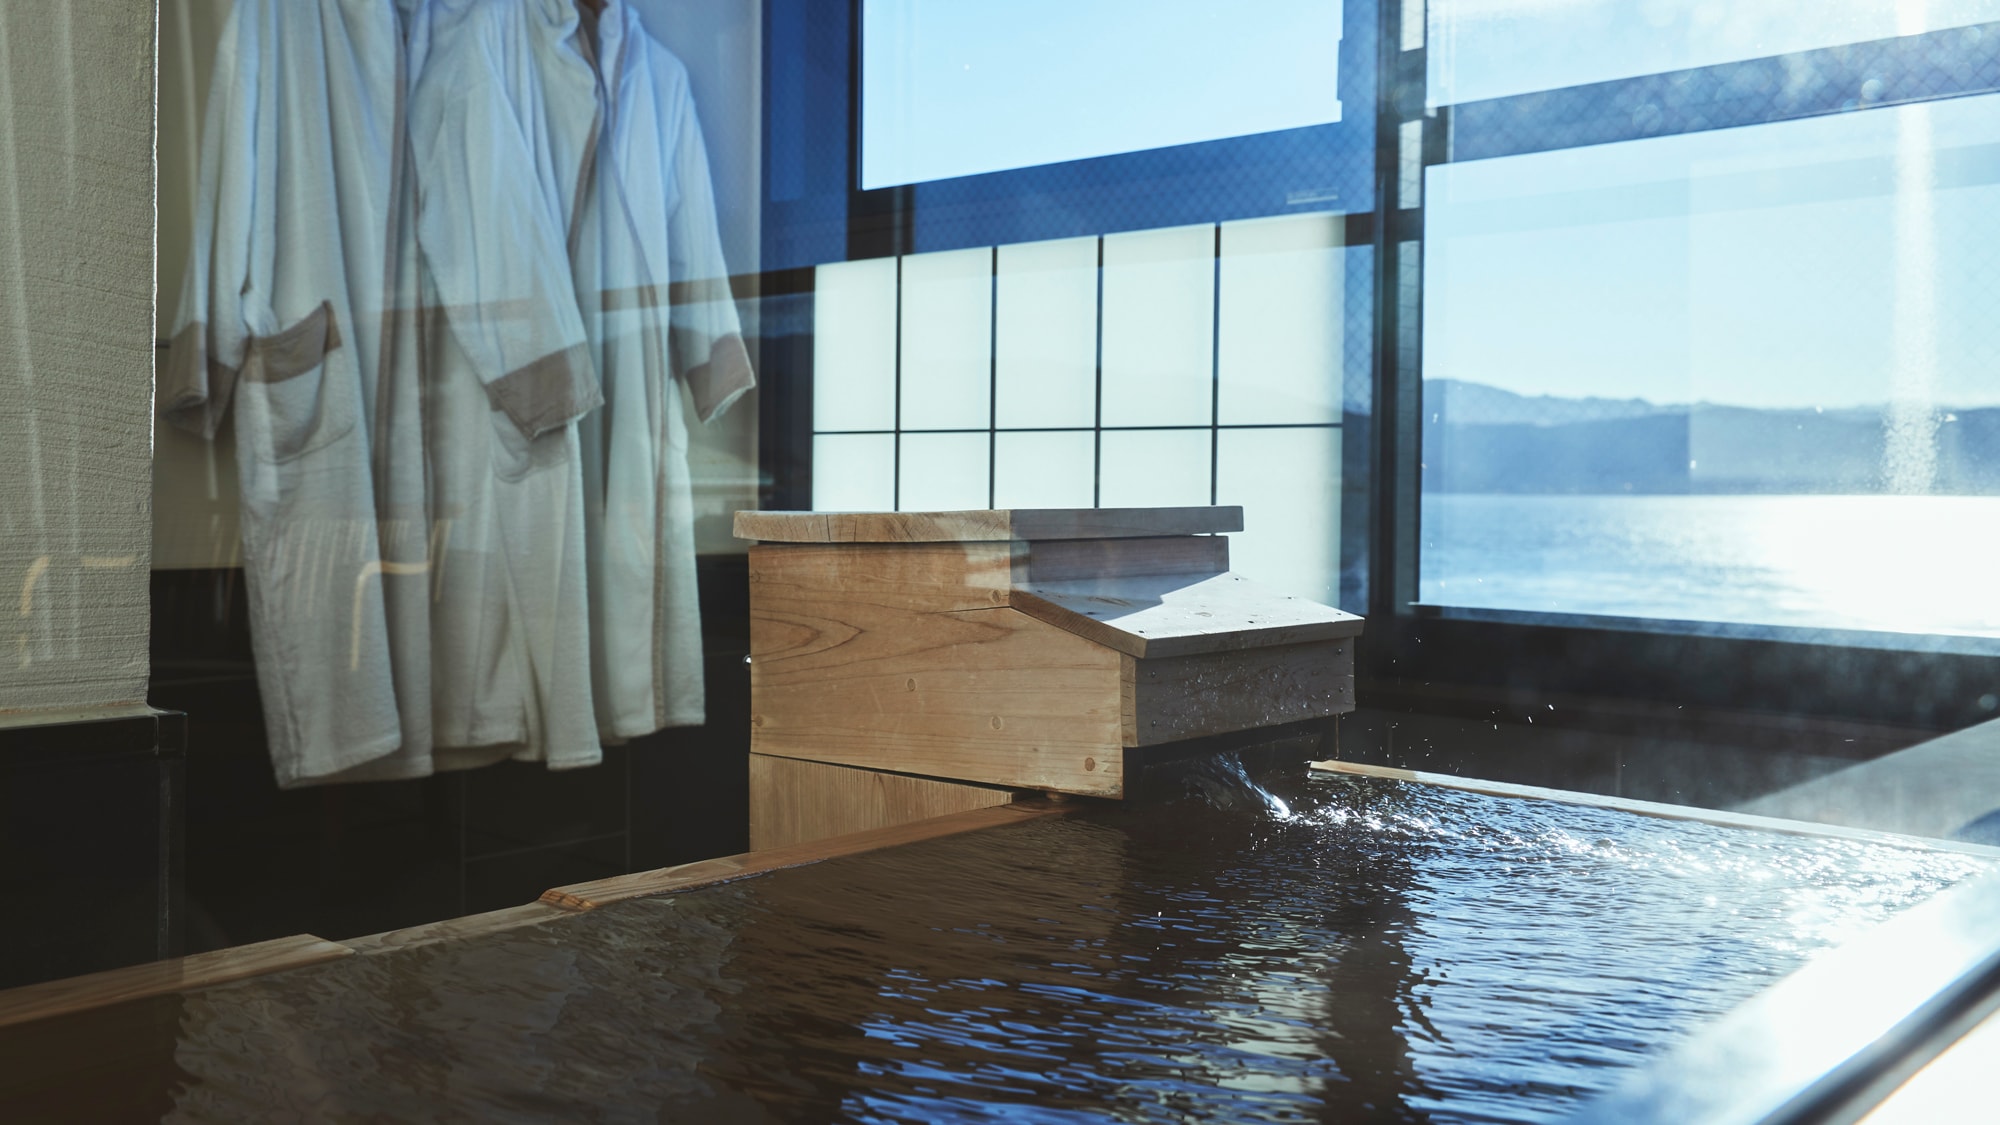 The open-air bath is a wide size that even two people can take a relaxing bath [Standard type]